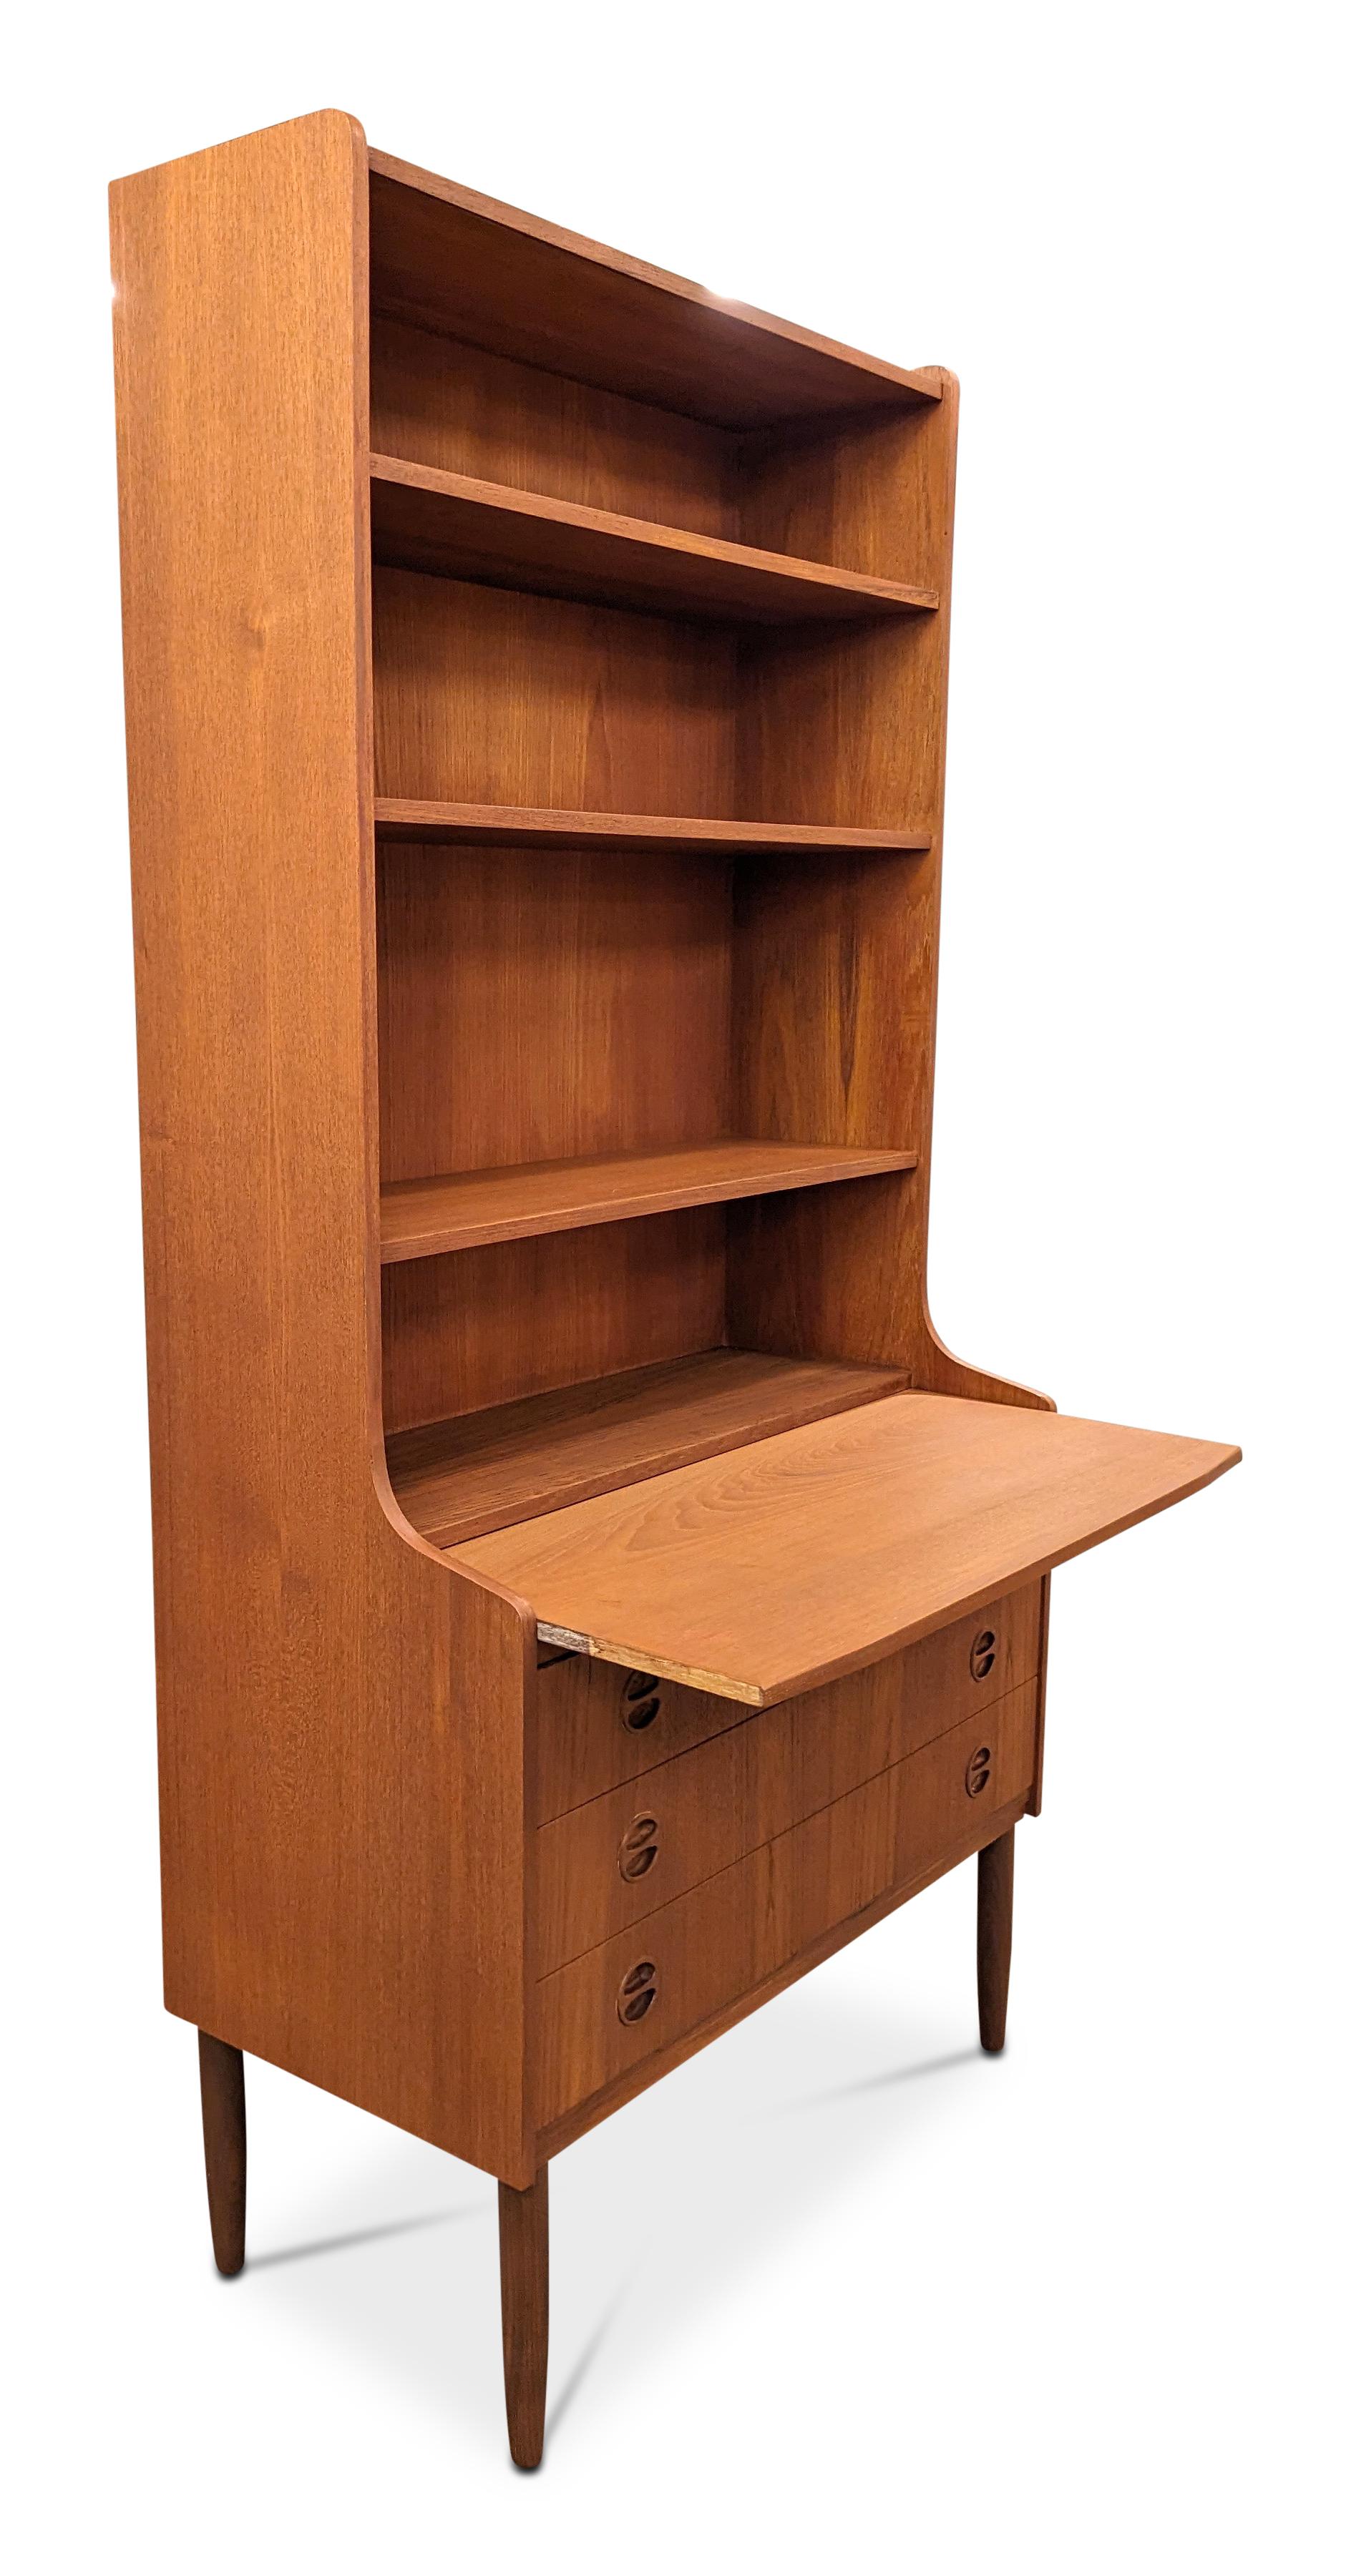 Teak Bookcase - 022440 Vintage Danish Mid Century  In Good Condition For Sale In Brooklyn, NY